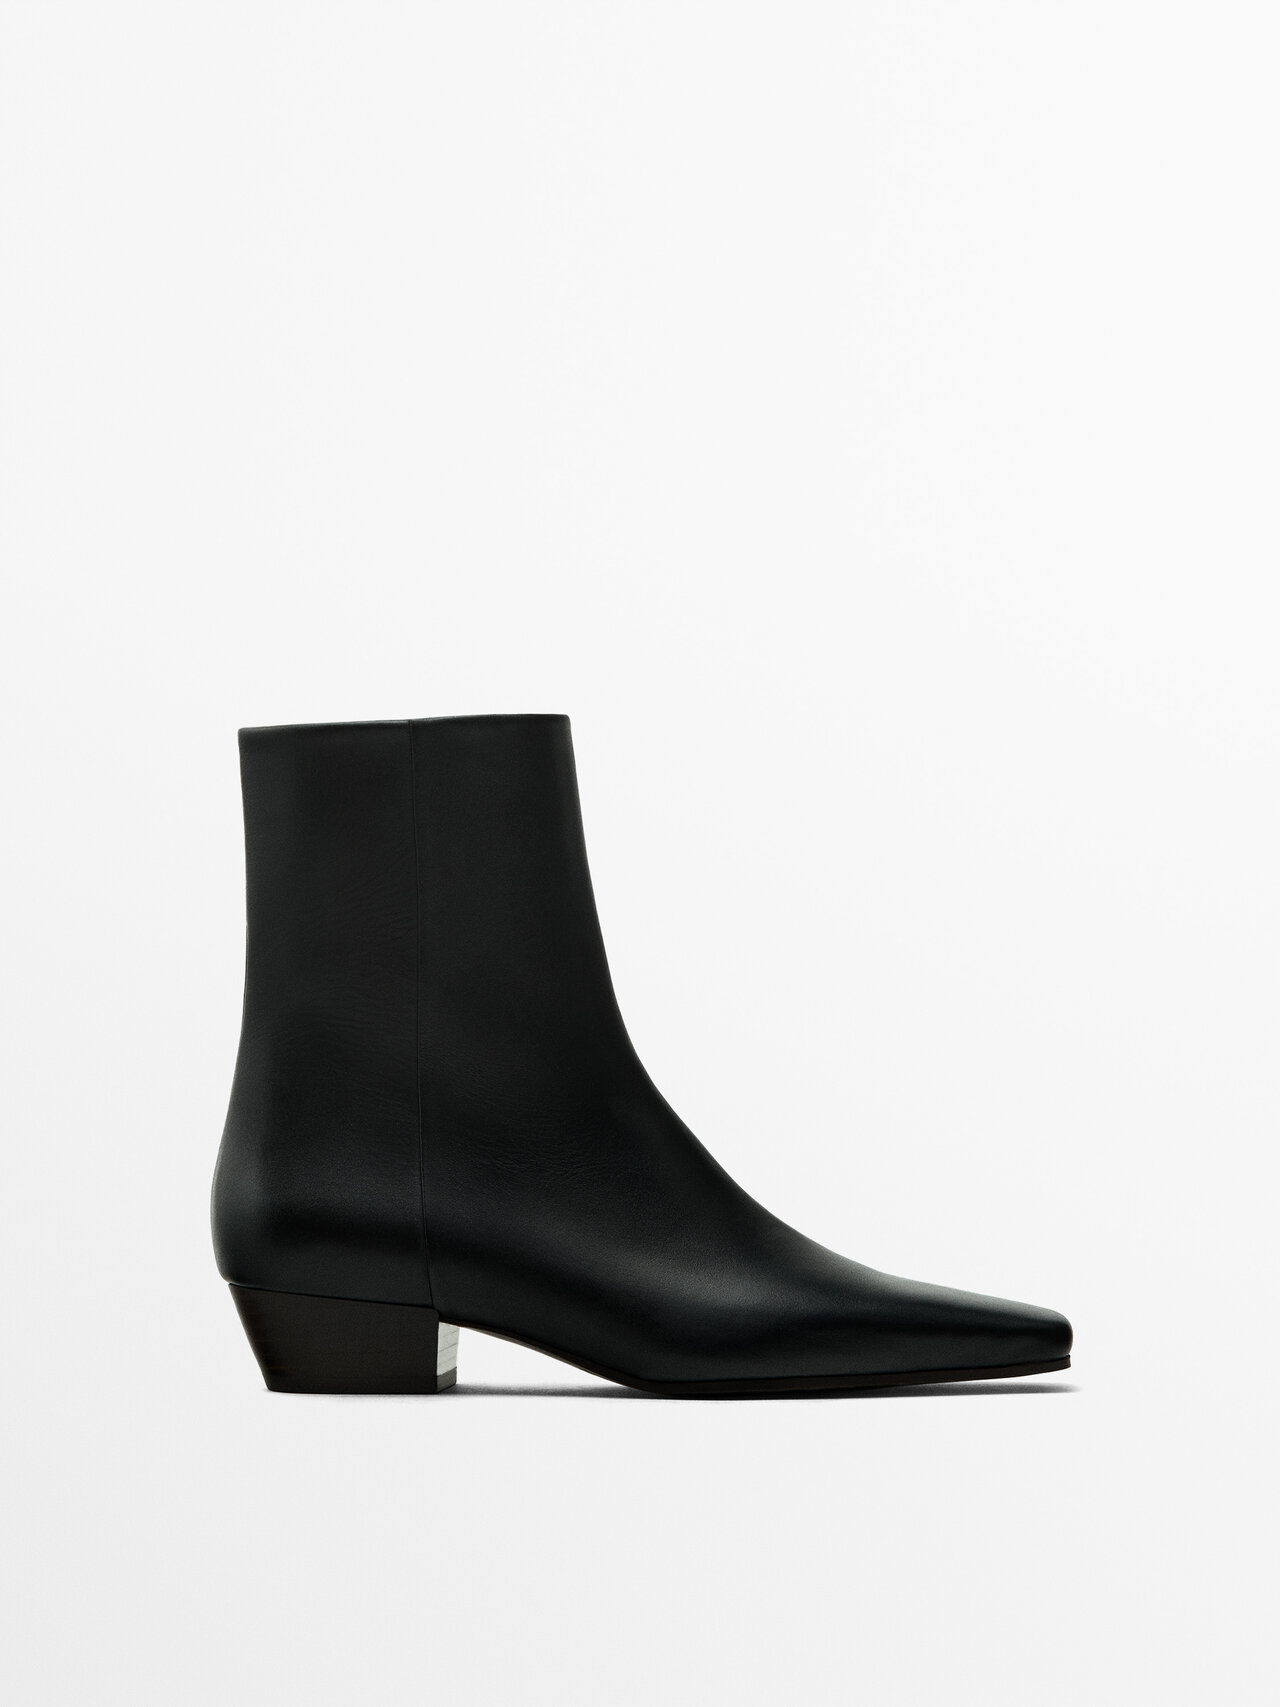 Massimo Dutti Leather High Heel Ankle Boots In Black